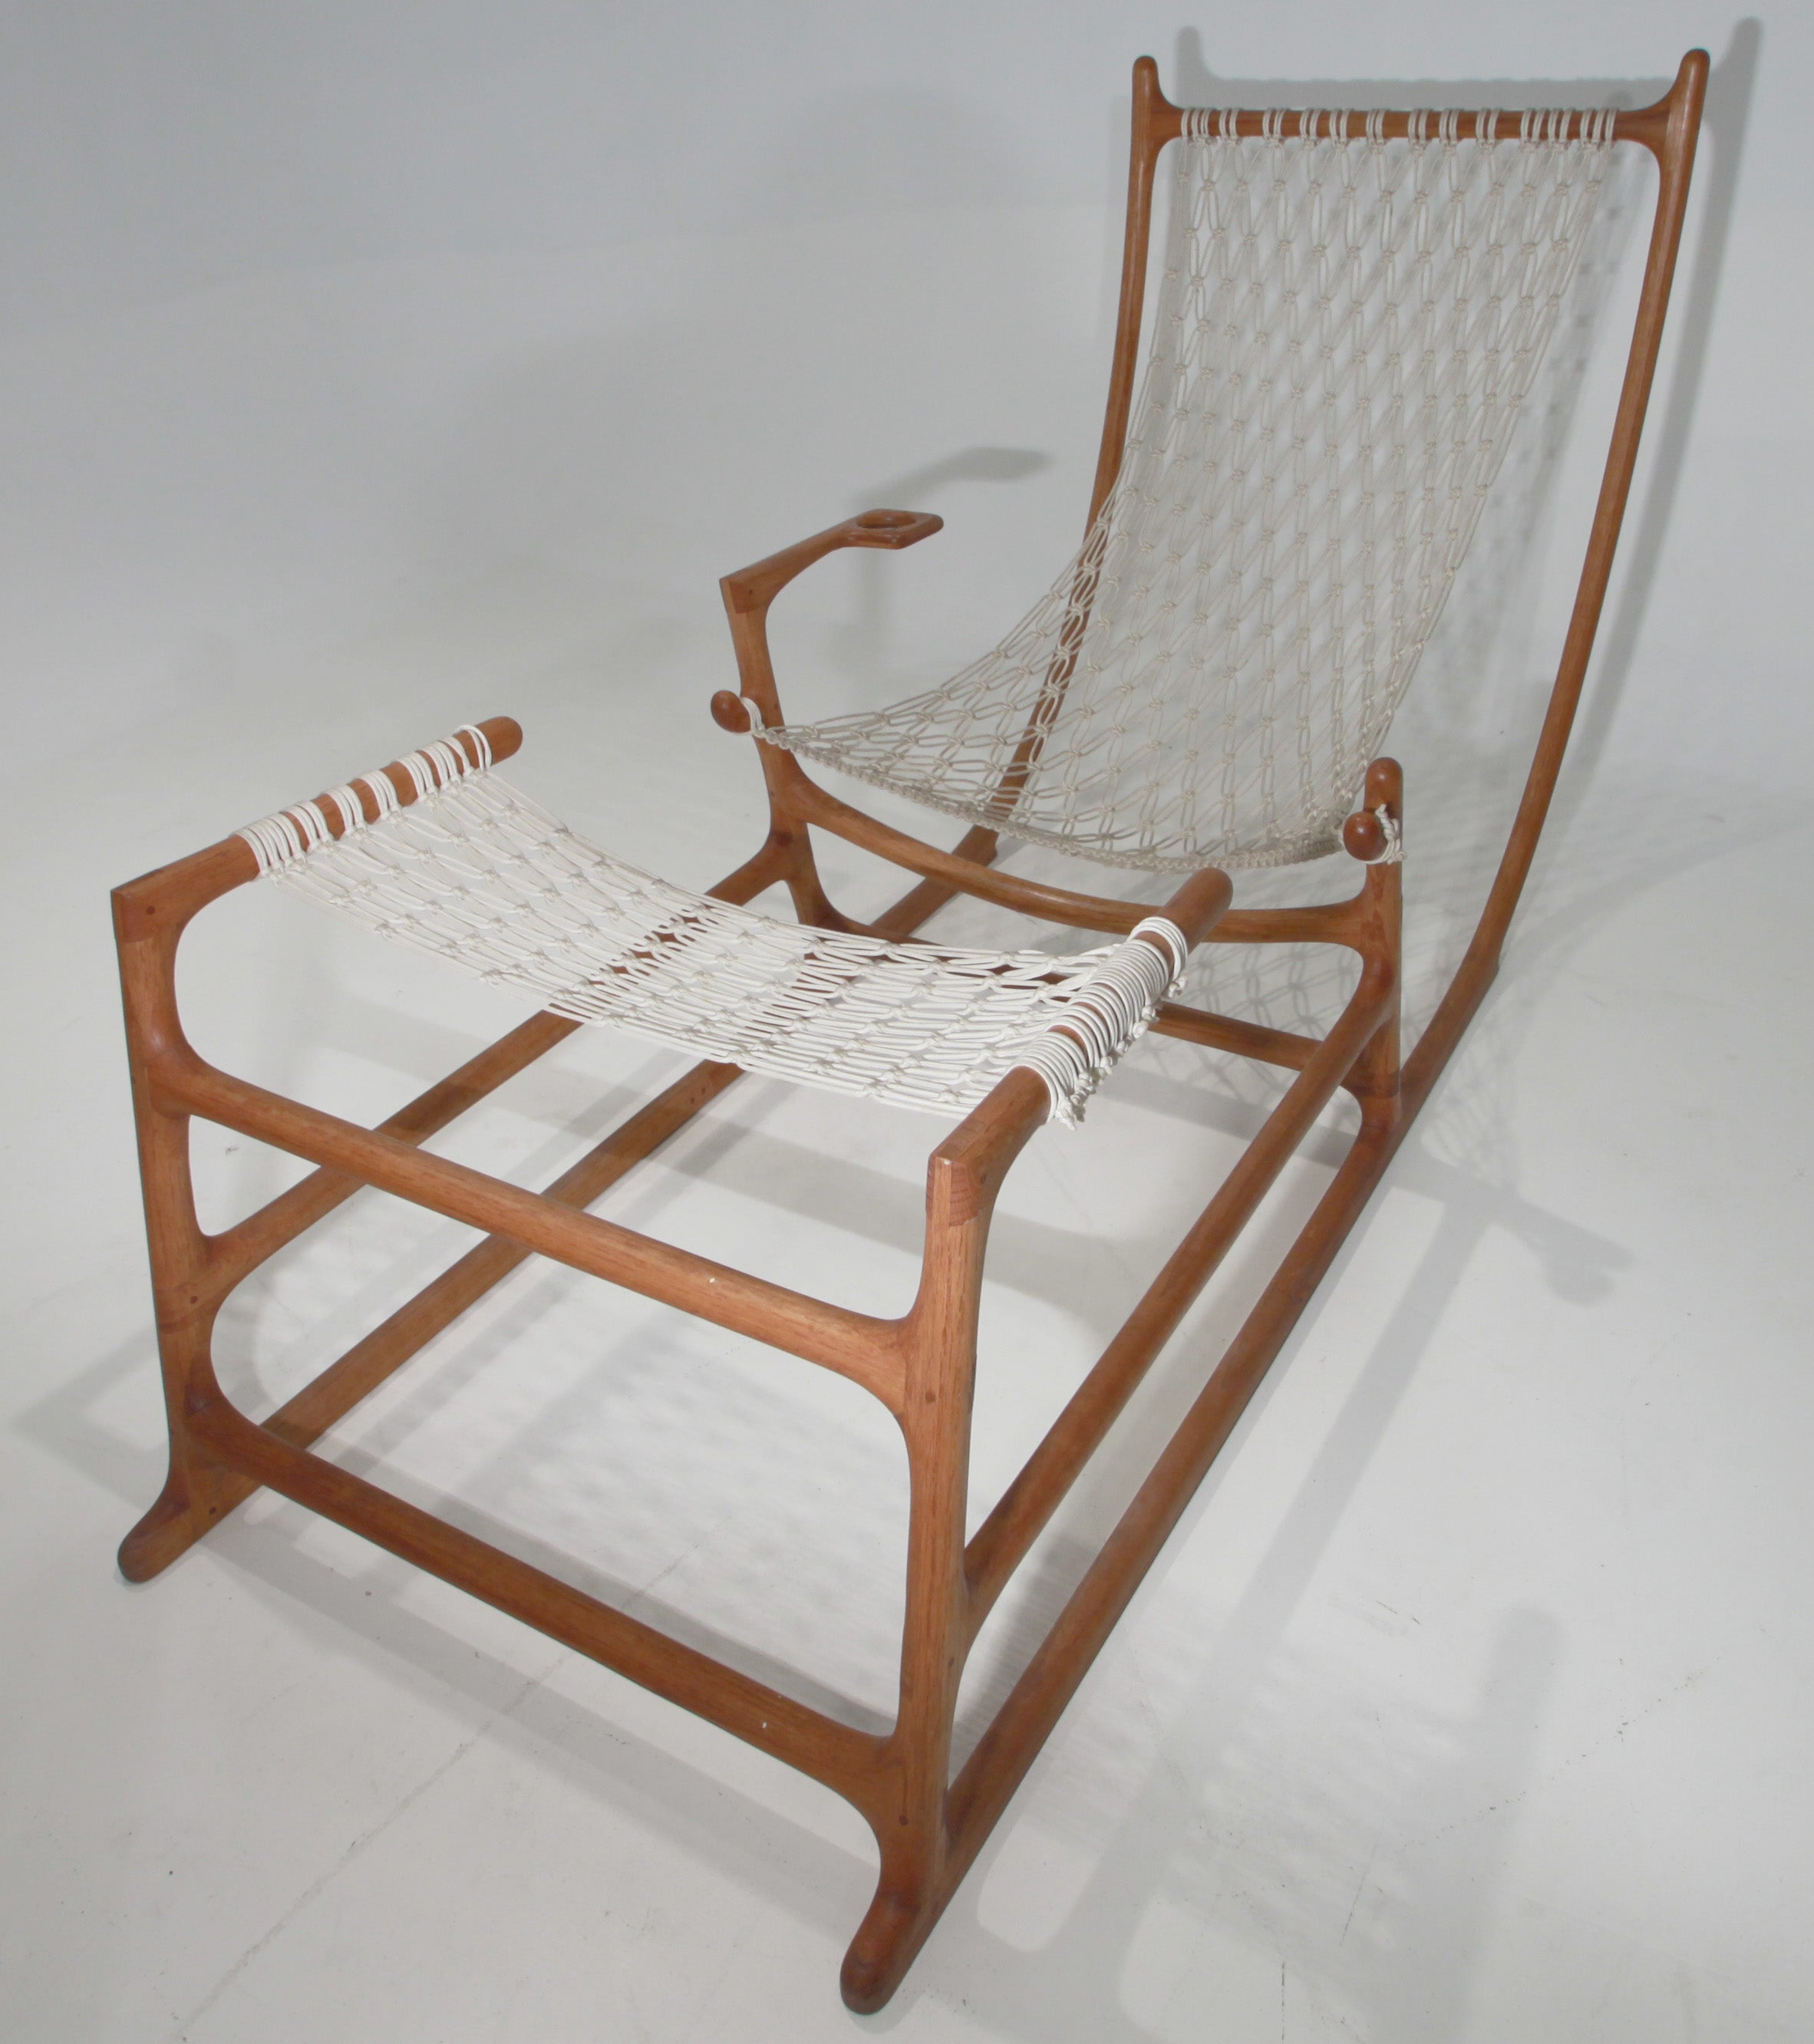 Rare 1970s American Craft Hammock Chair by William C. Leete. For Sale